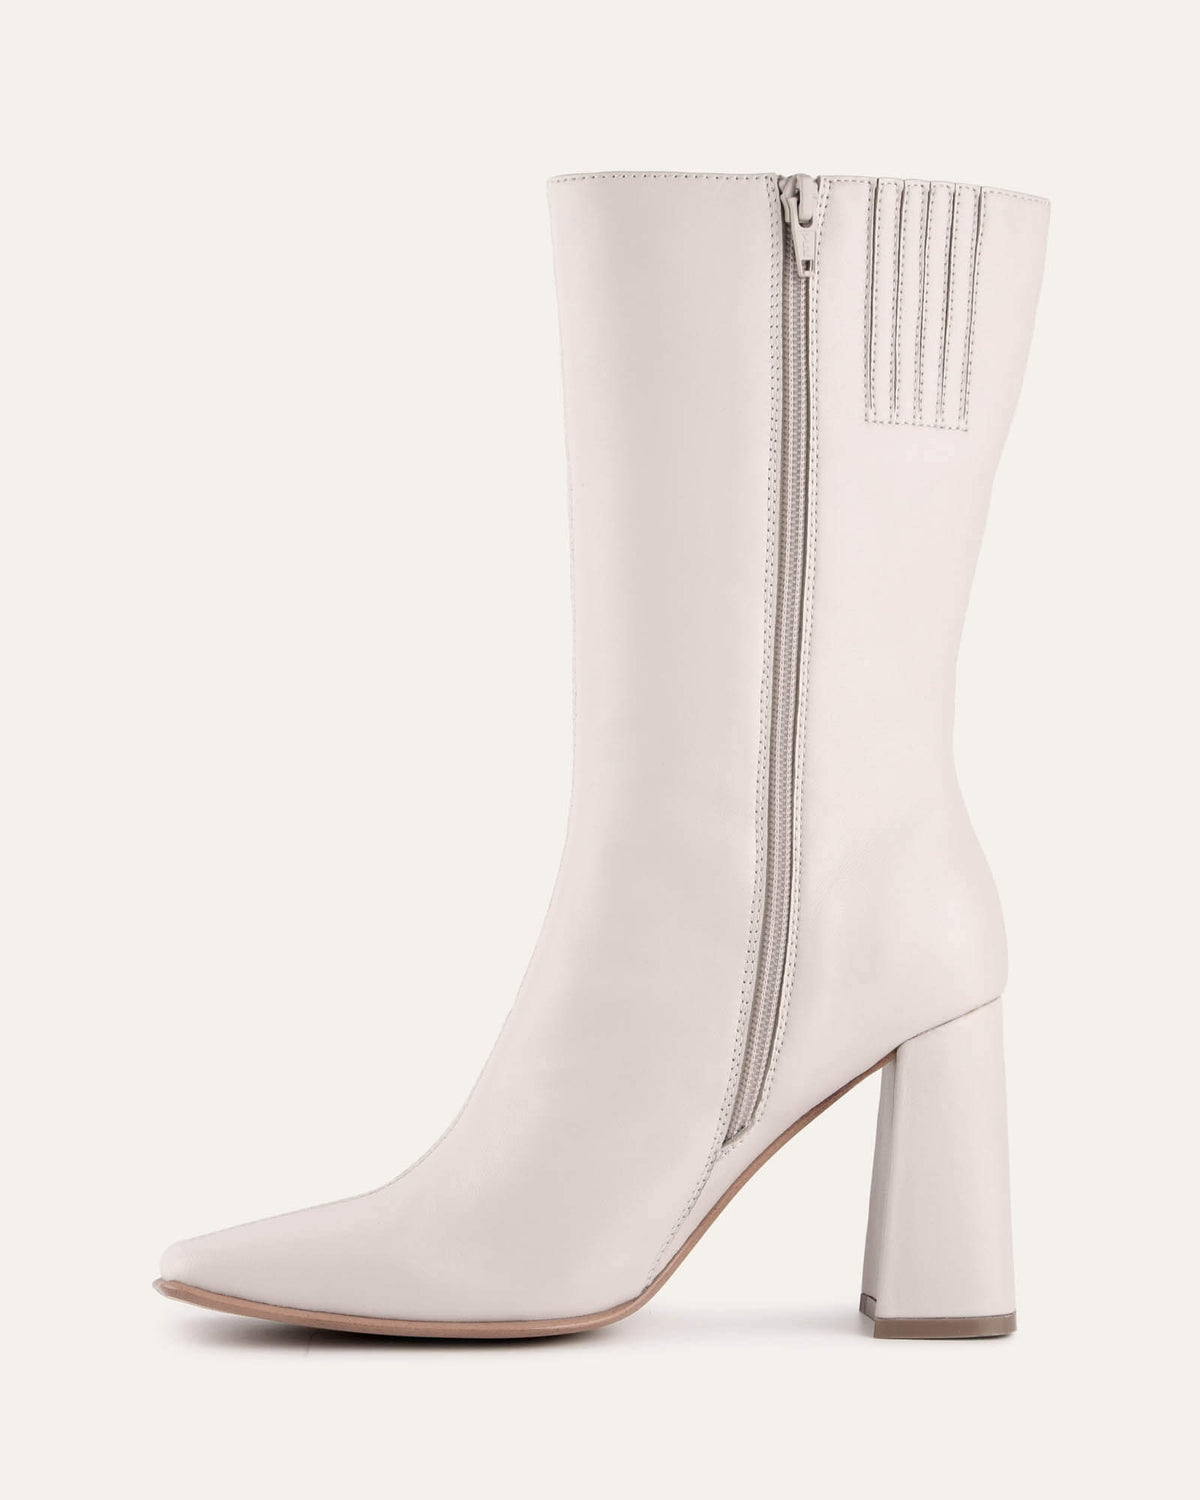 RUSH CALF BOOTS OFF WHITE LEATHER